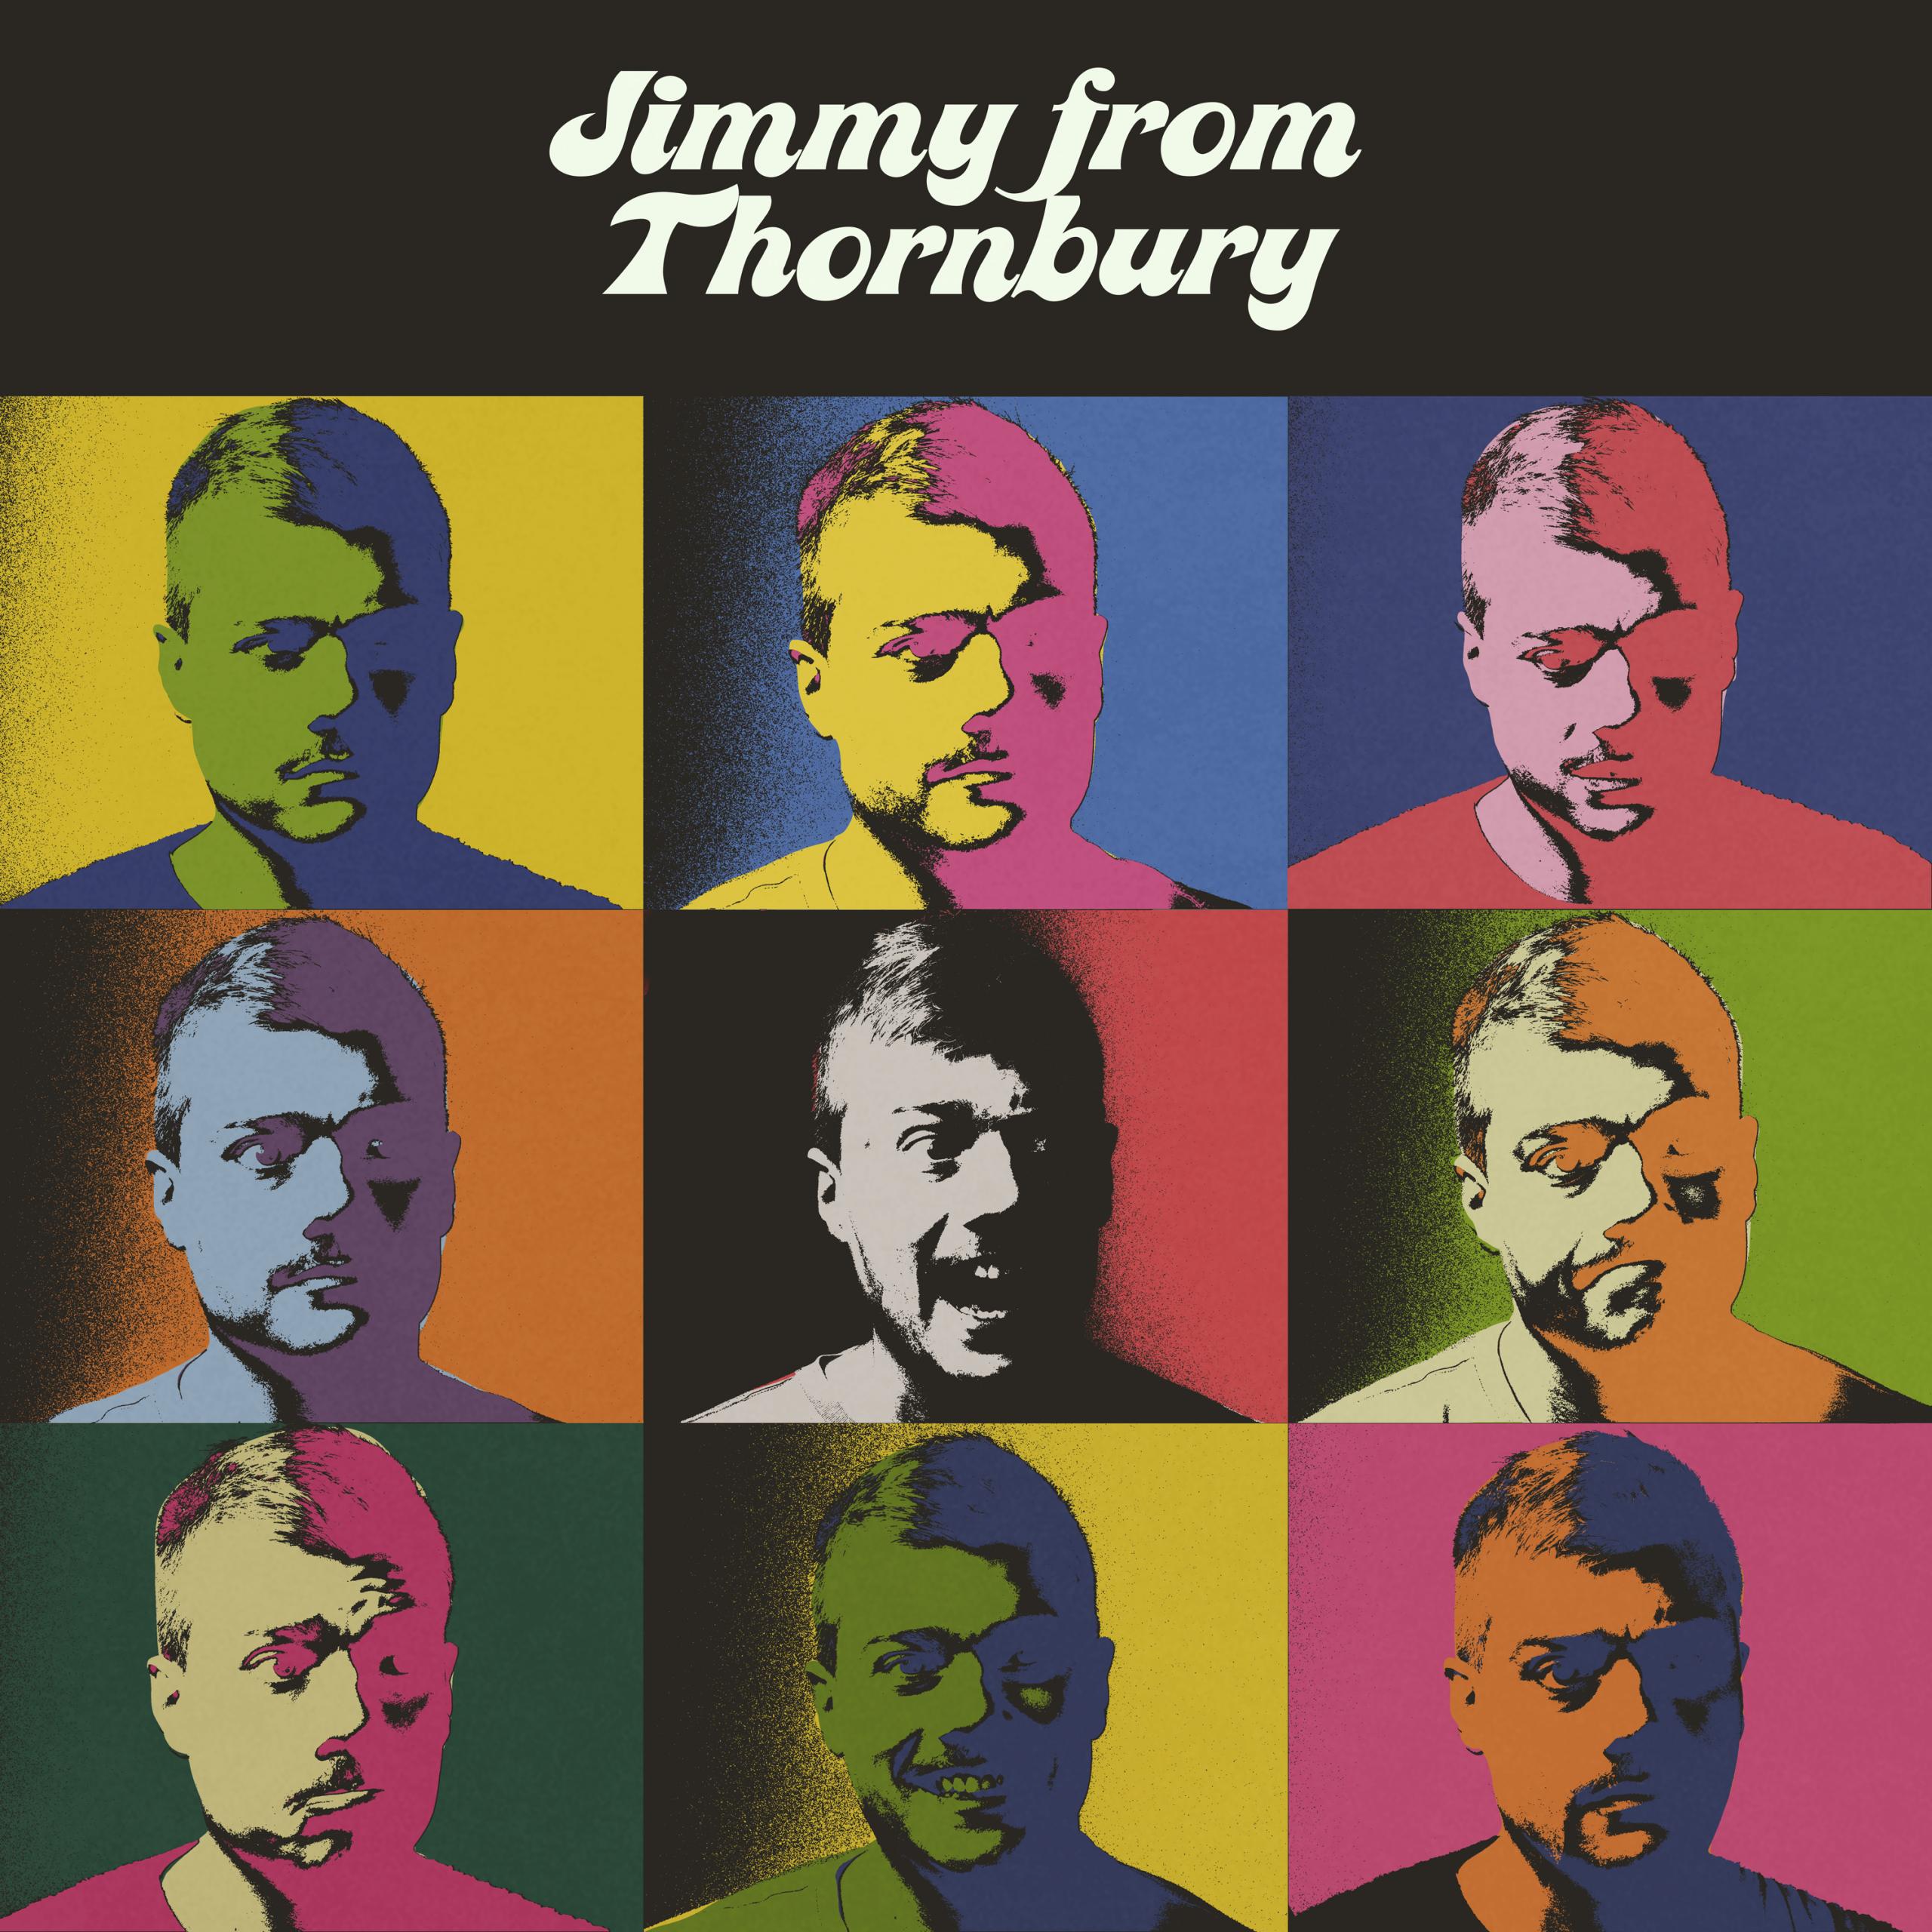 Jimmy from Thornbury album cover featuring a pop art collage of Jeremy Hopkins pulling different facial expressions. He has a short haircut and is wearing a t-shirt.